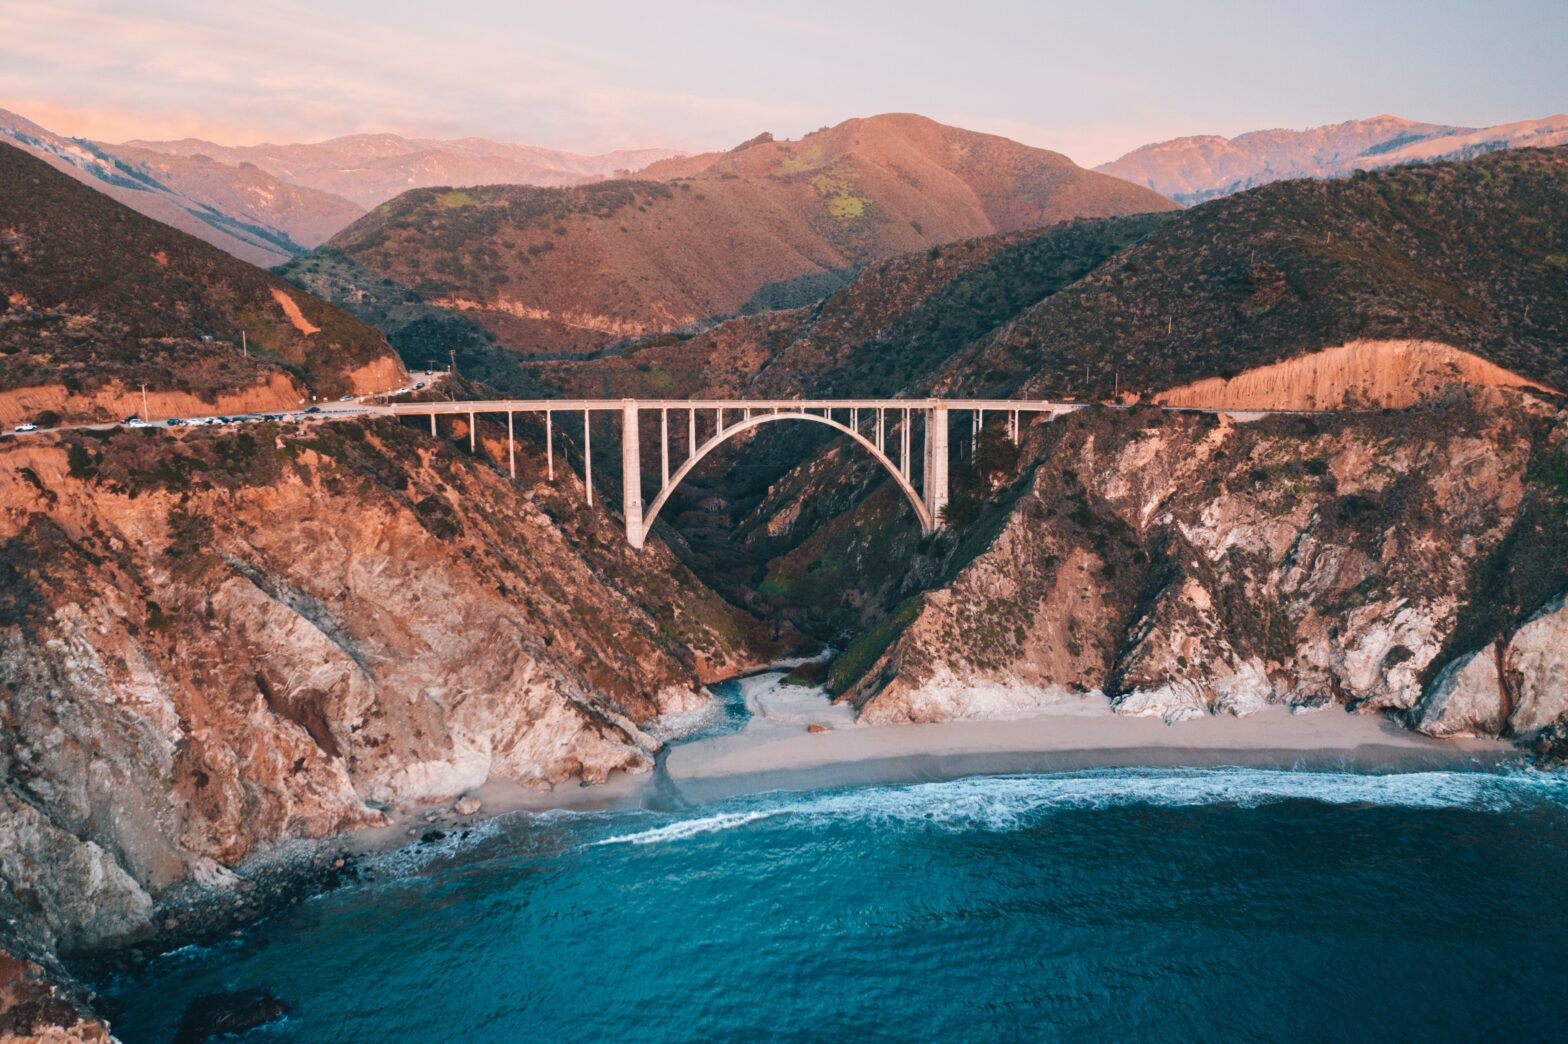 Where To Stay In Big Sur